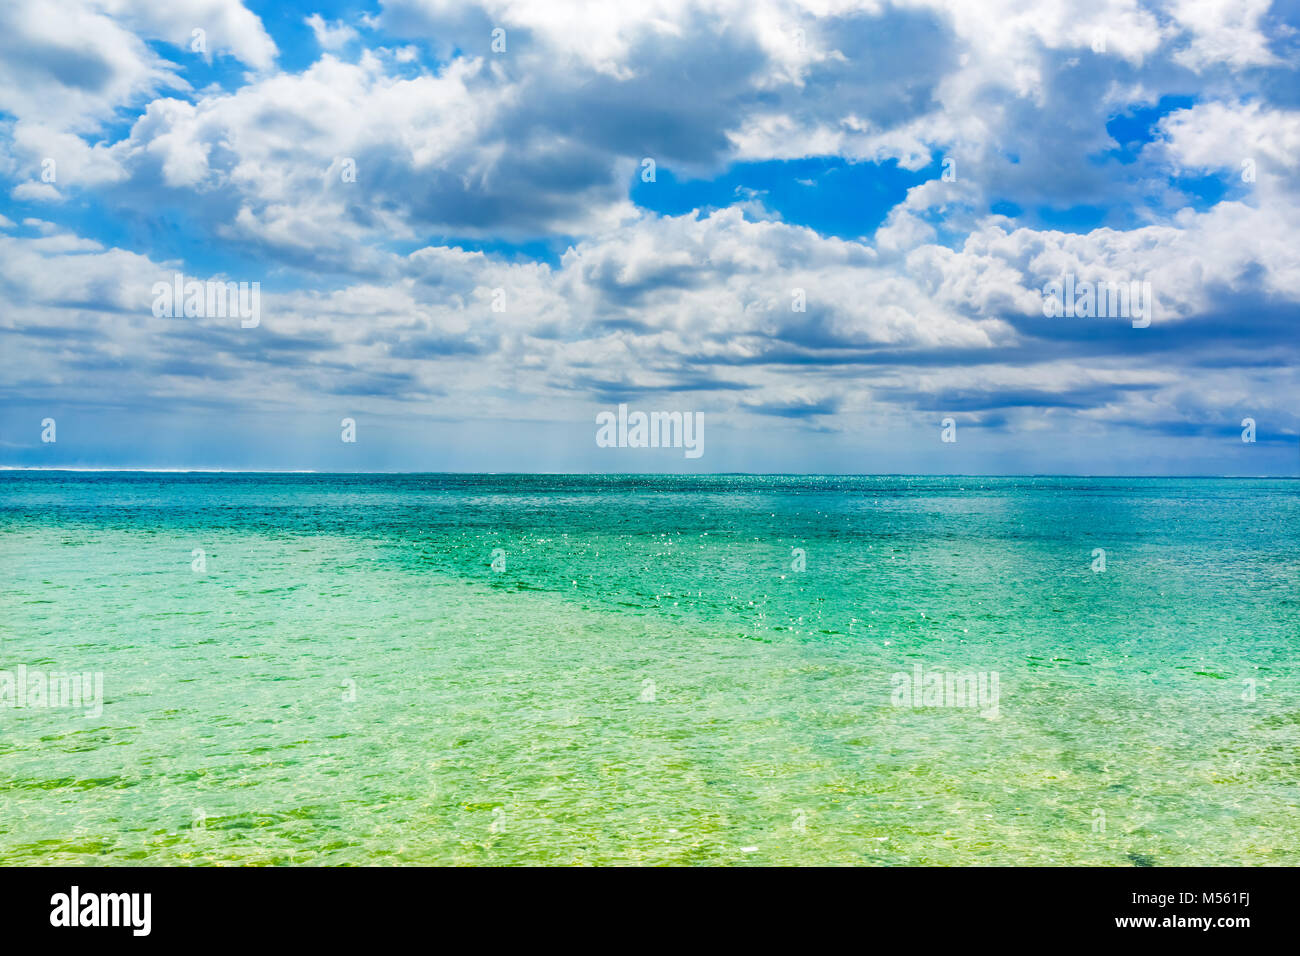 Beautiful landscape. Sea at day time Stock Photo